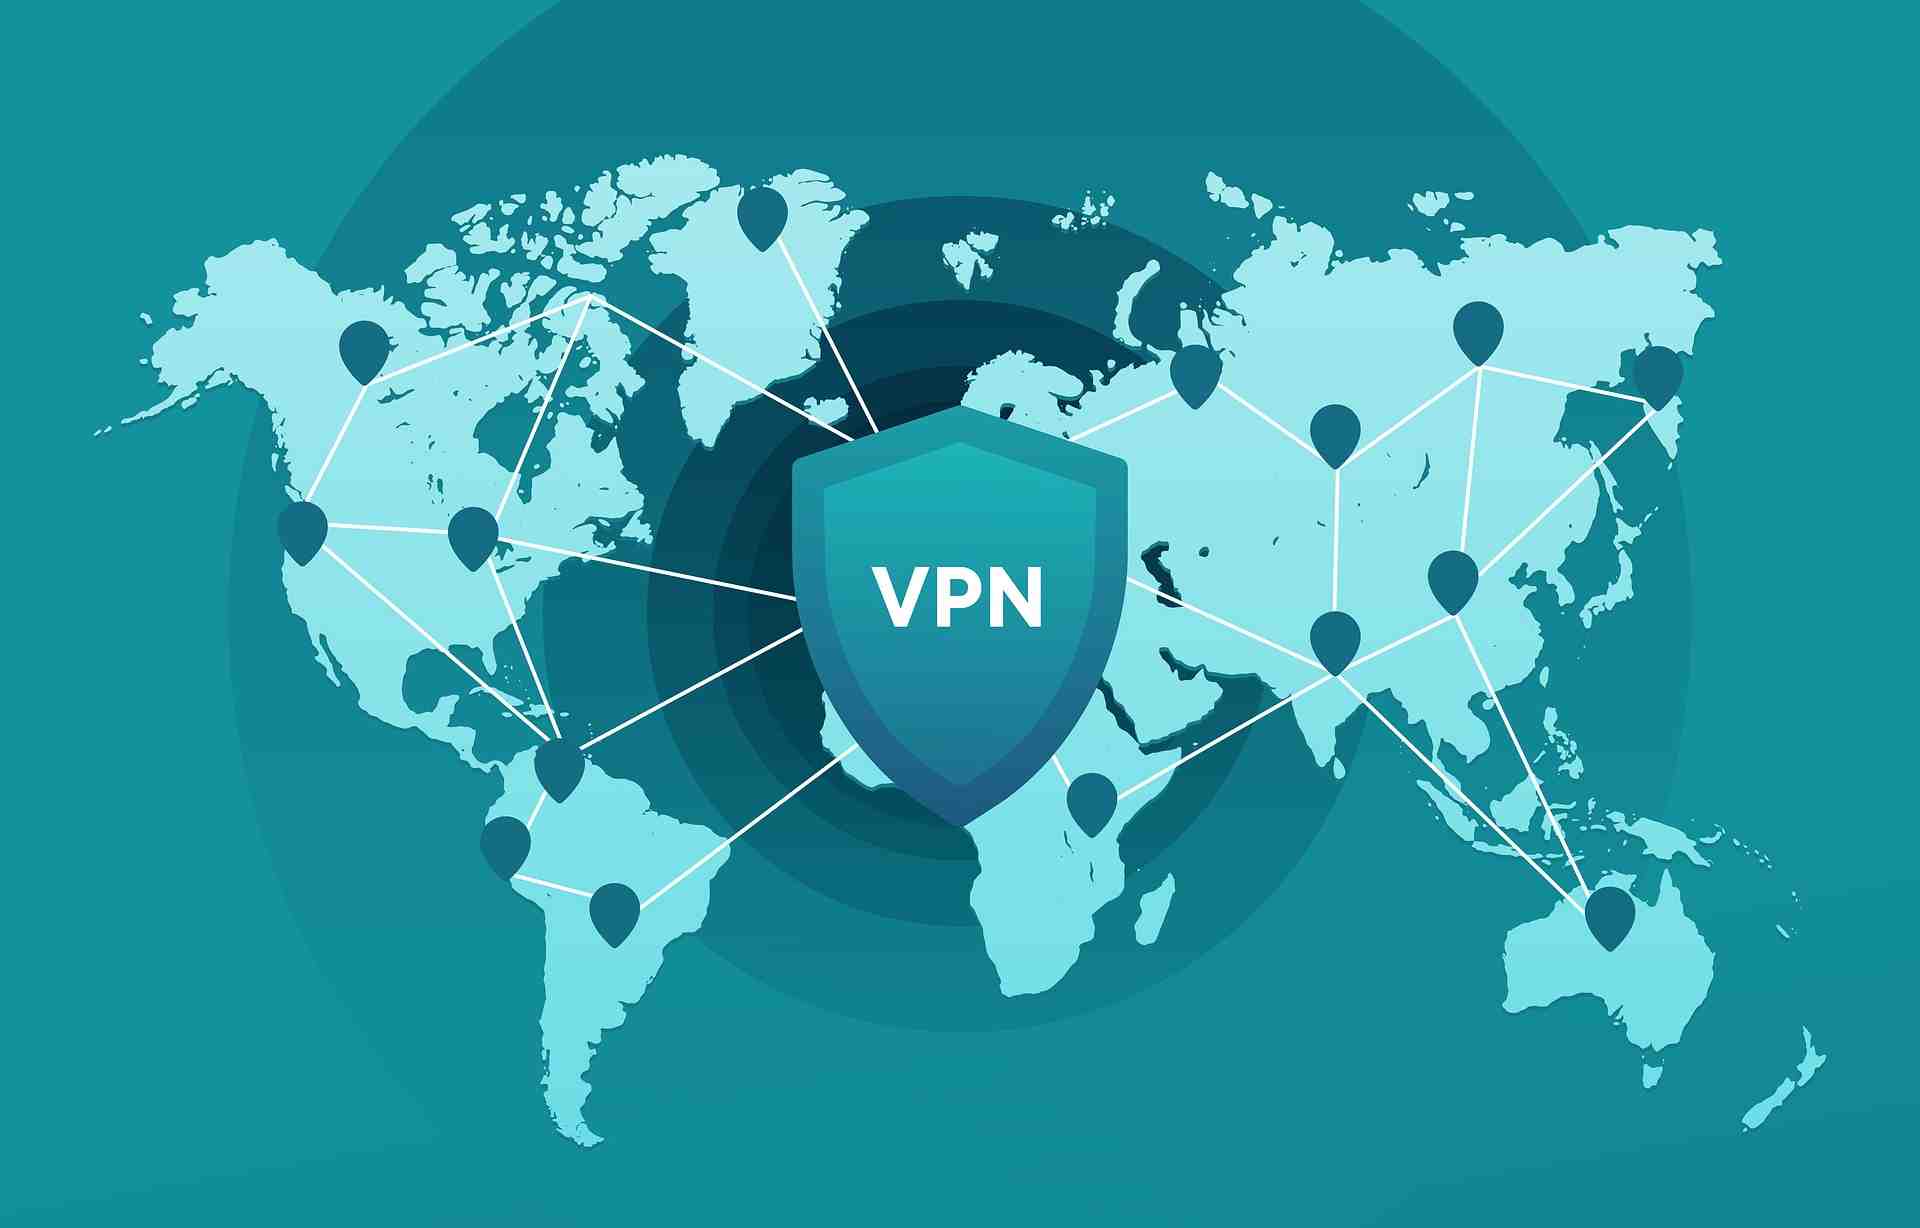 Are VPN actually worth it?